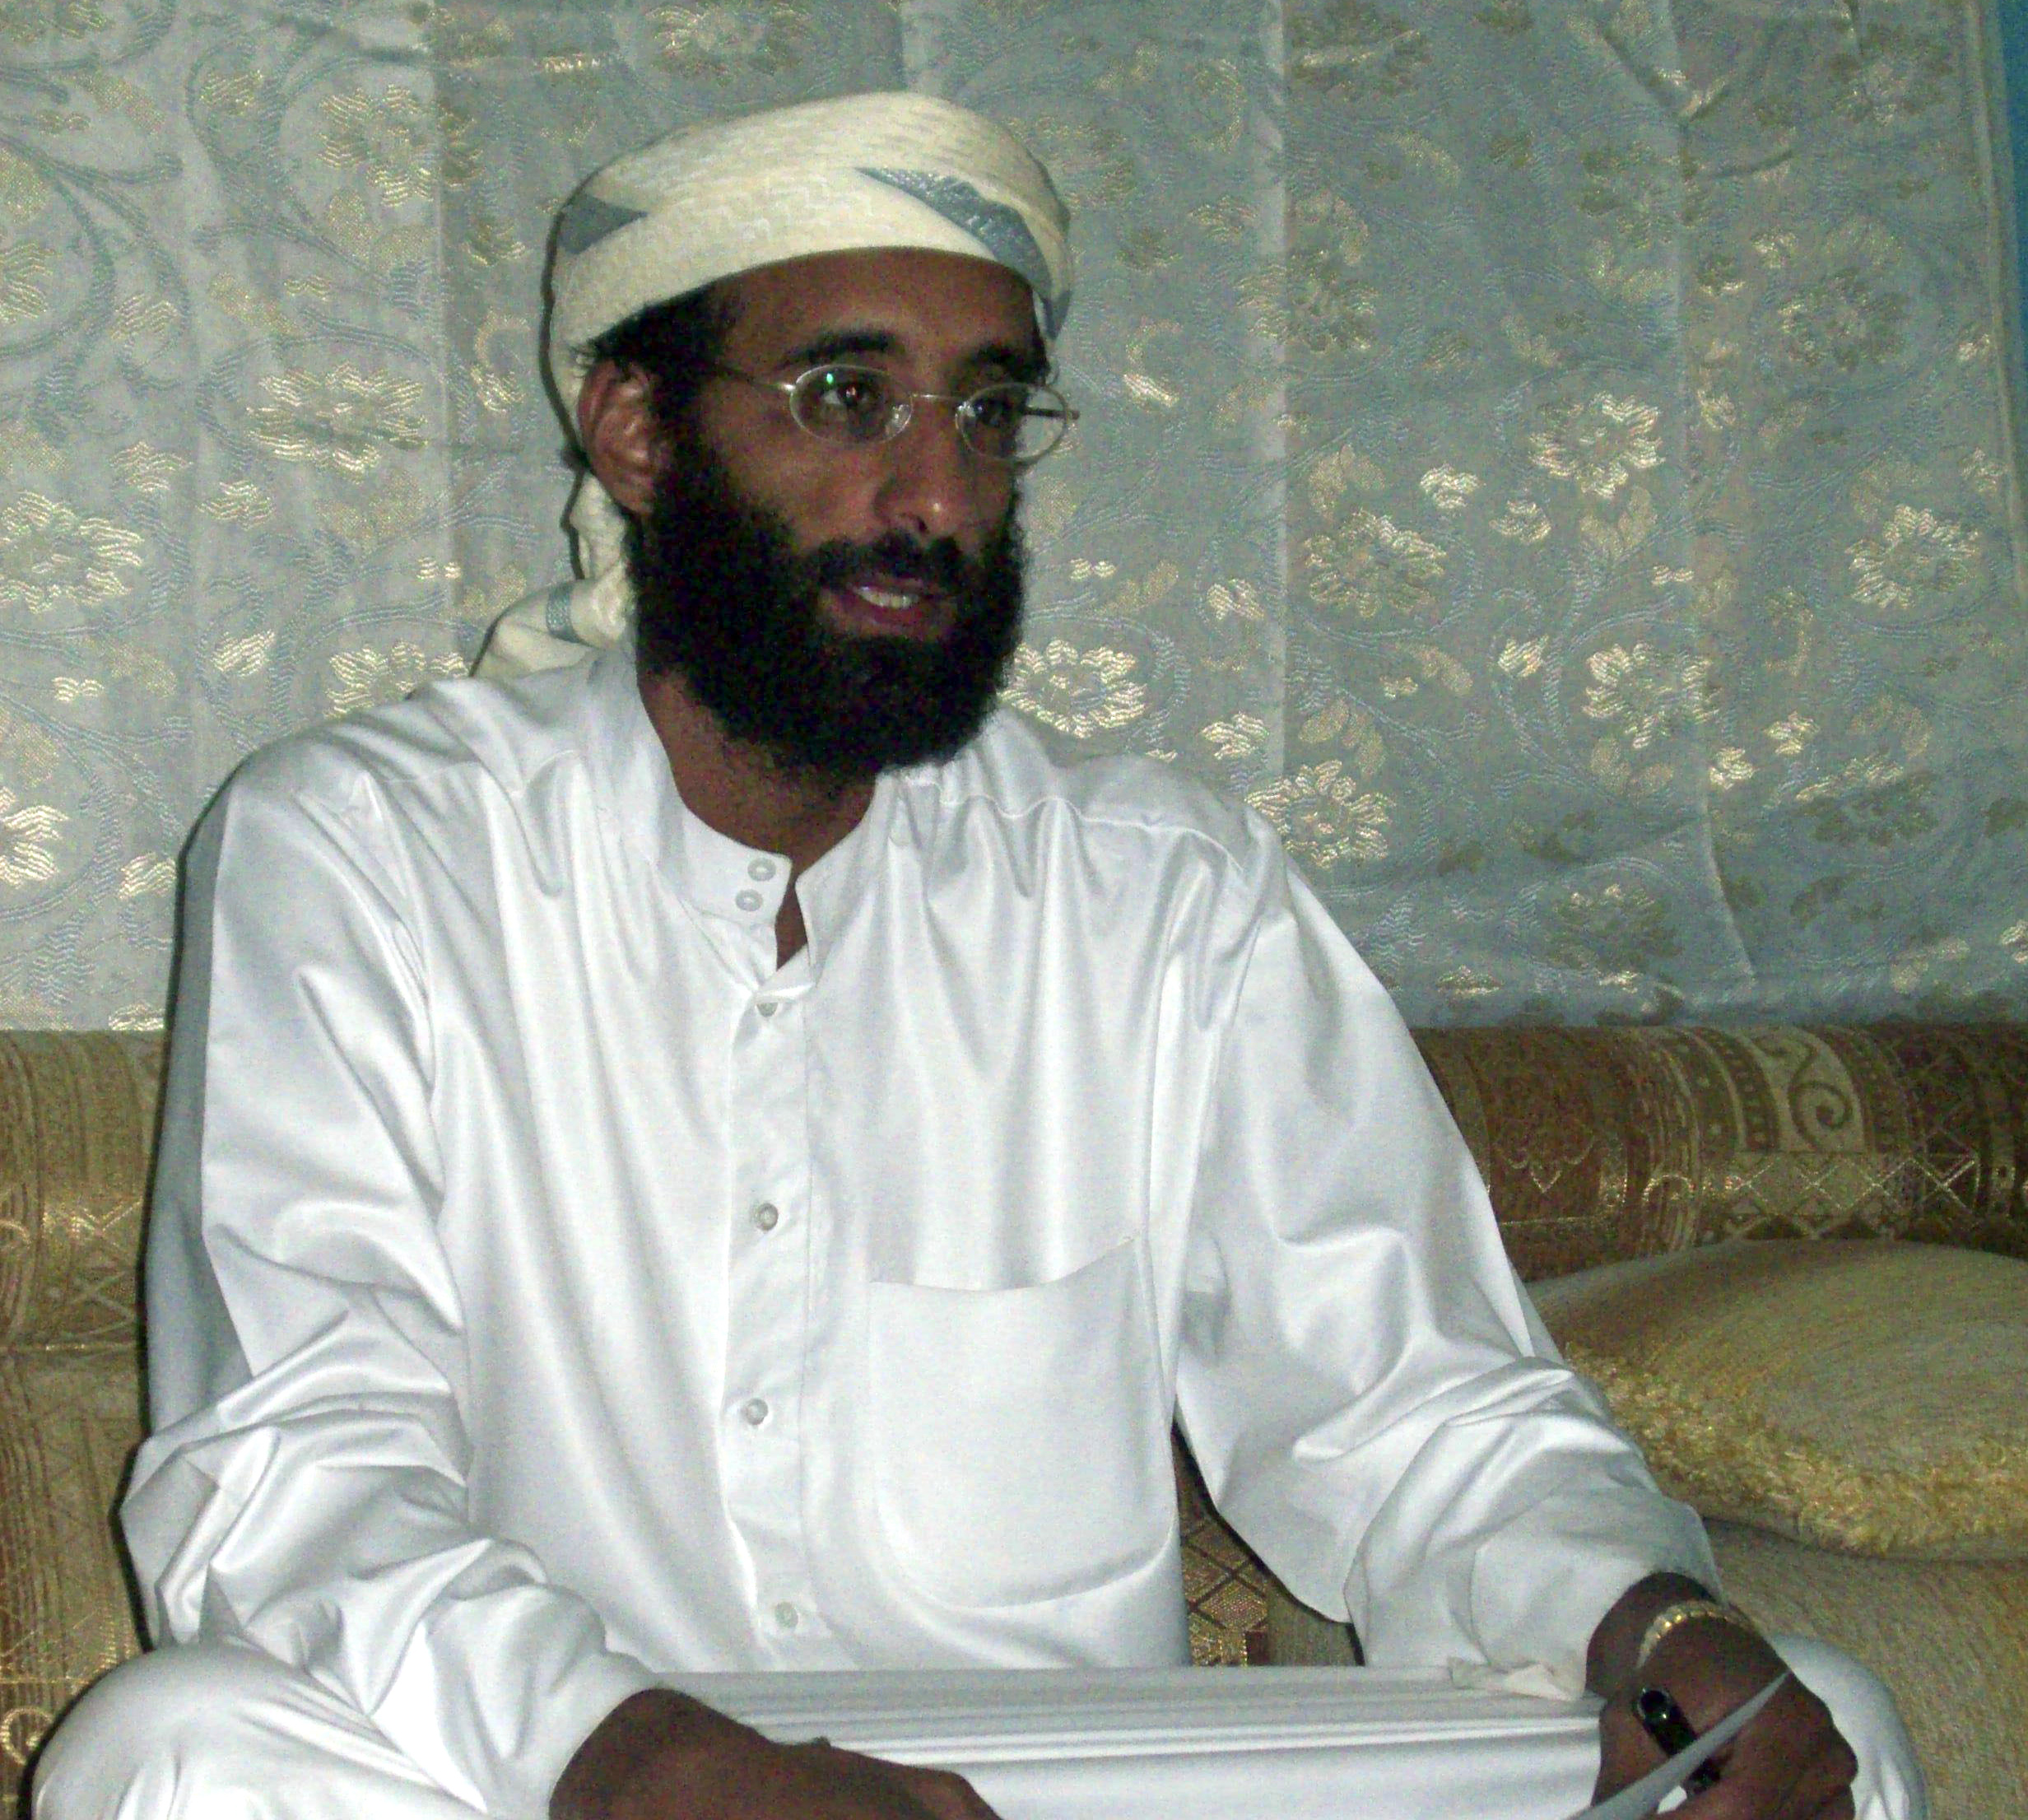 This October 2008 file photo shows Anwar al-Awlaki in Yemen. He was killed in a U.S. drone strike three years later, in 2011 (Muhammad ud-Deen—AP)